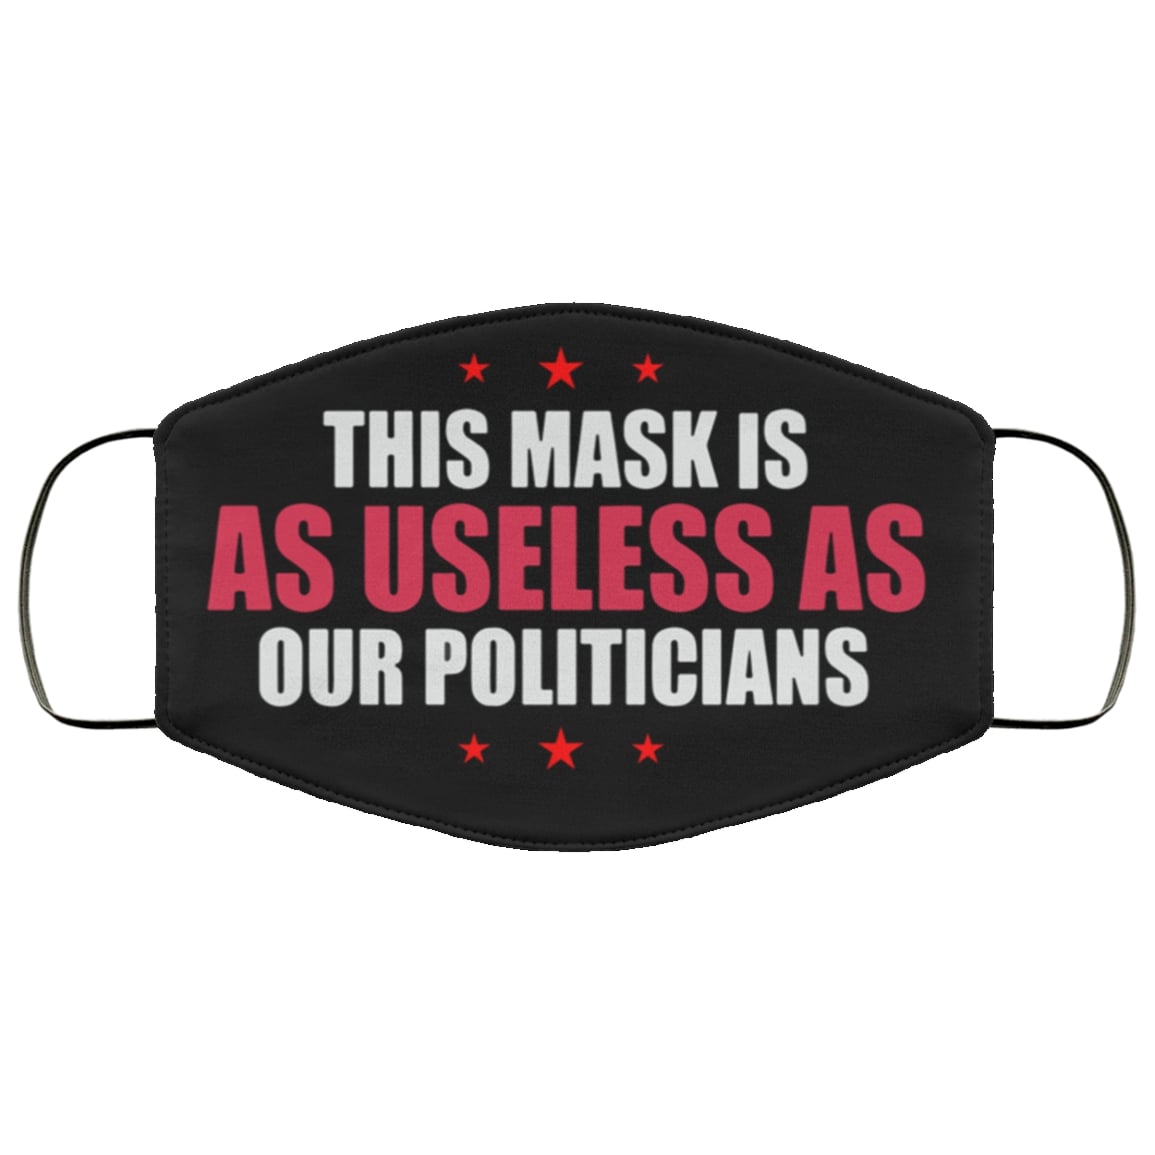 This mask is as useless as our politicians anti pollution face mask - maria